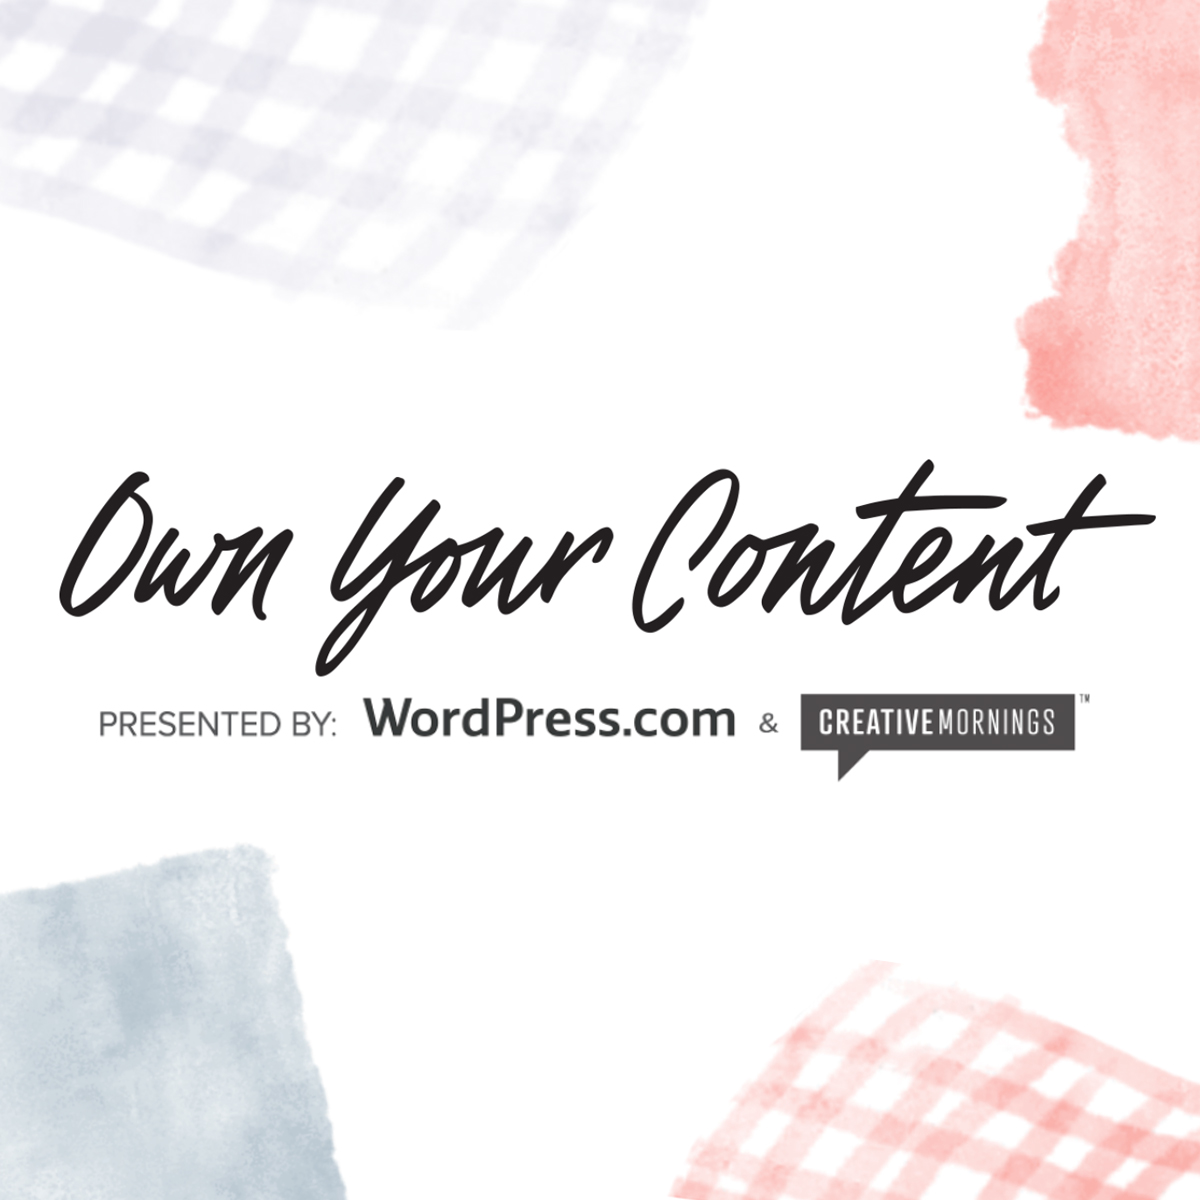 Own Your Content website logo